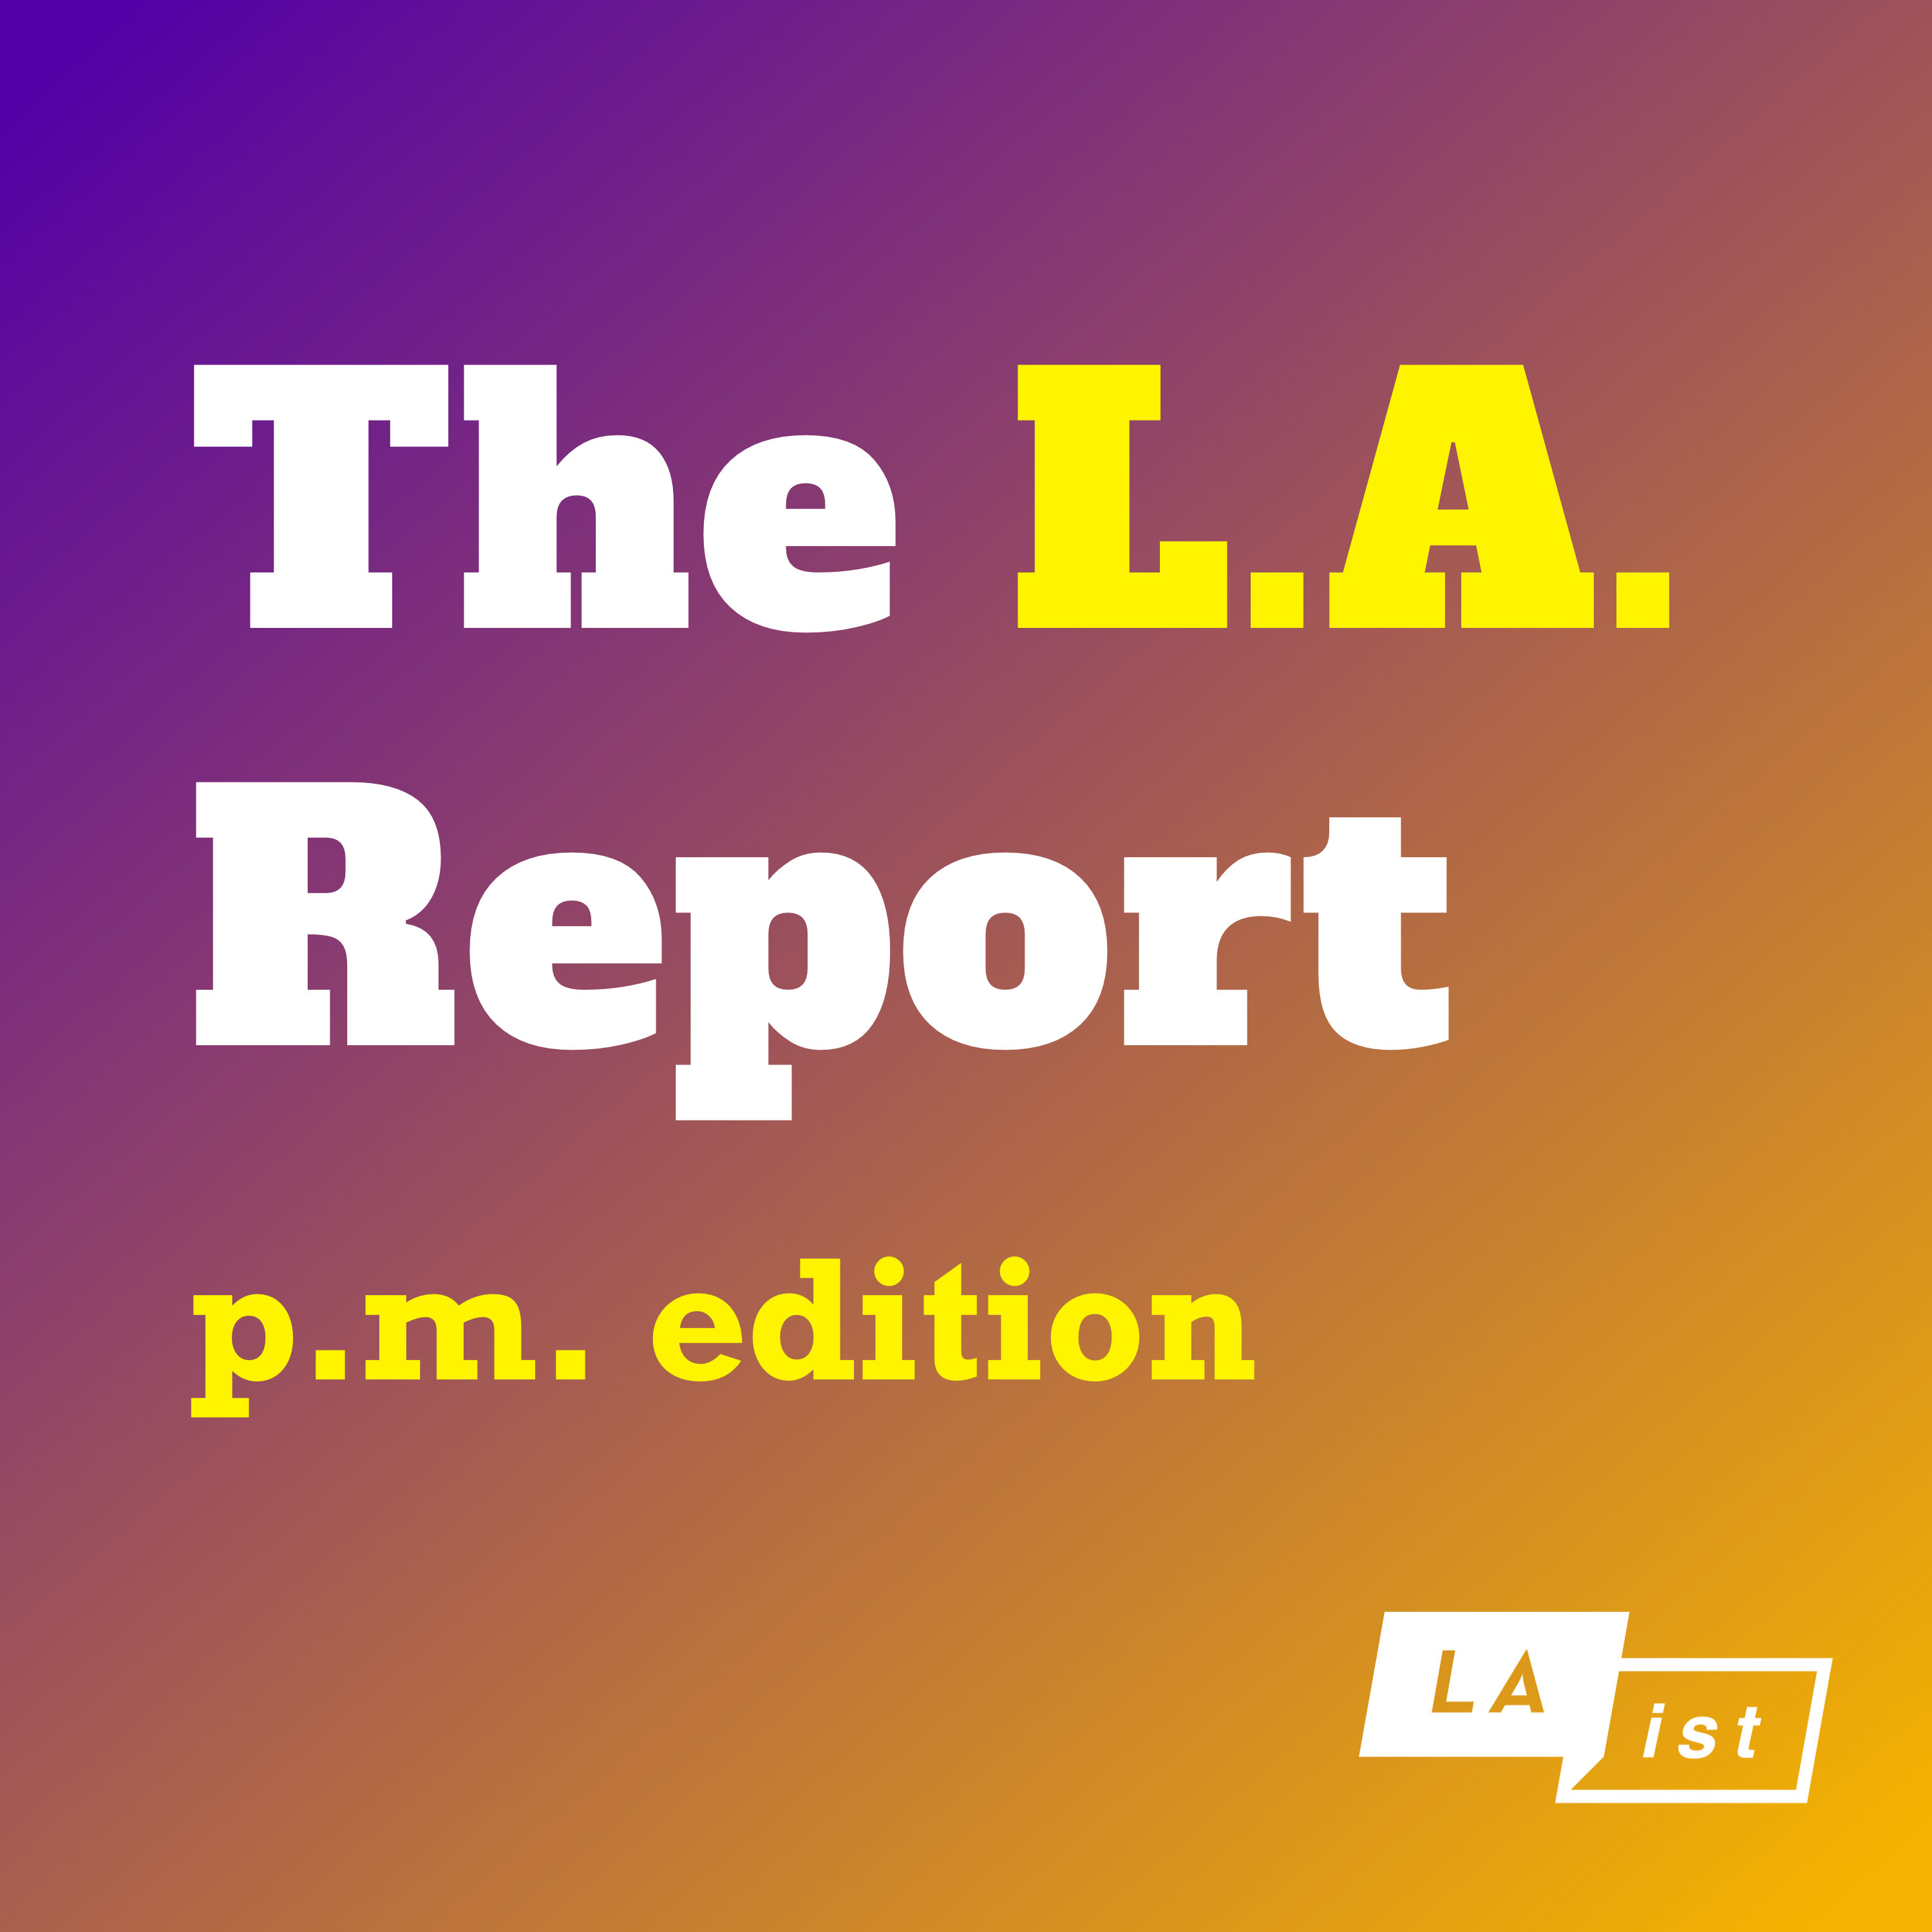 LA City Council Ethics Reform Advances, Chinatown Tenants To Get $15M In Rental Aid, &  Free WiFi In Huntington Park — The P.M. Edition